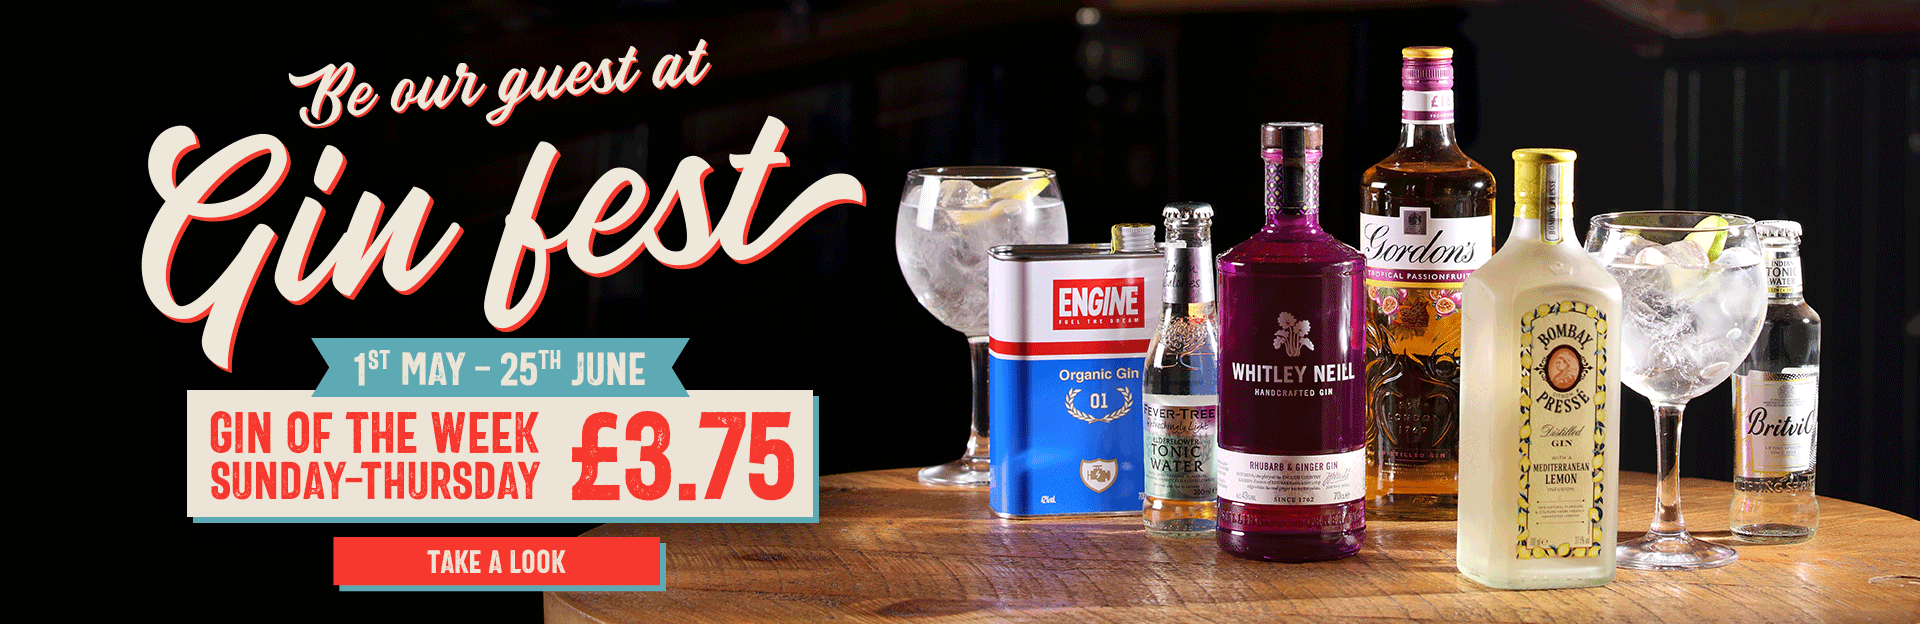 Gin Fest at O'Neill's St Mary Street